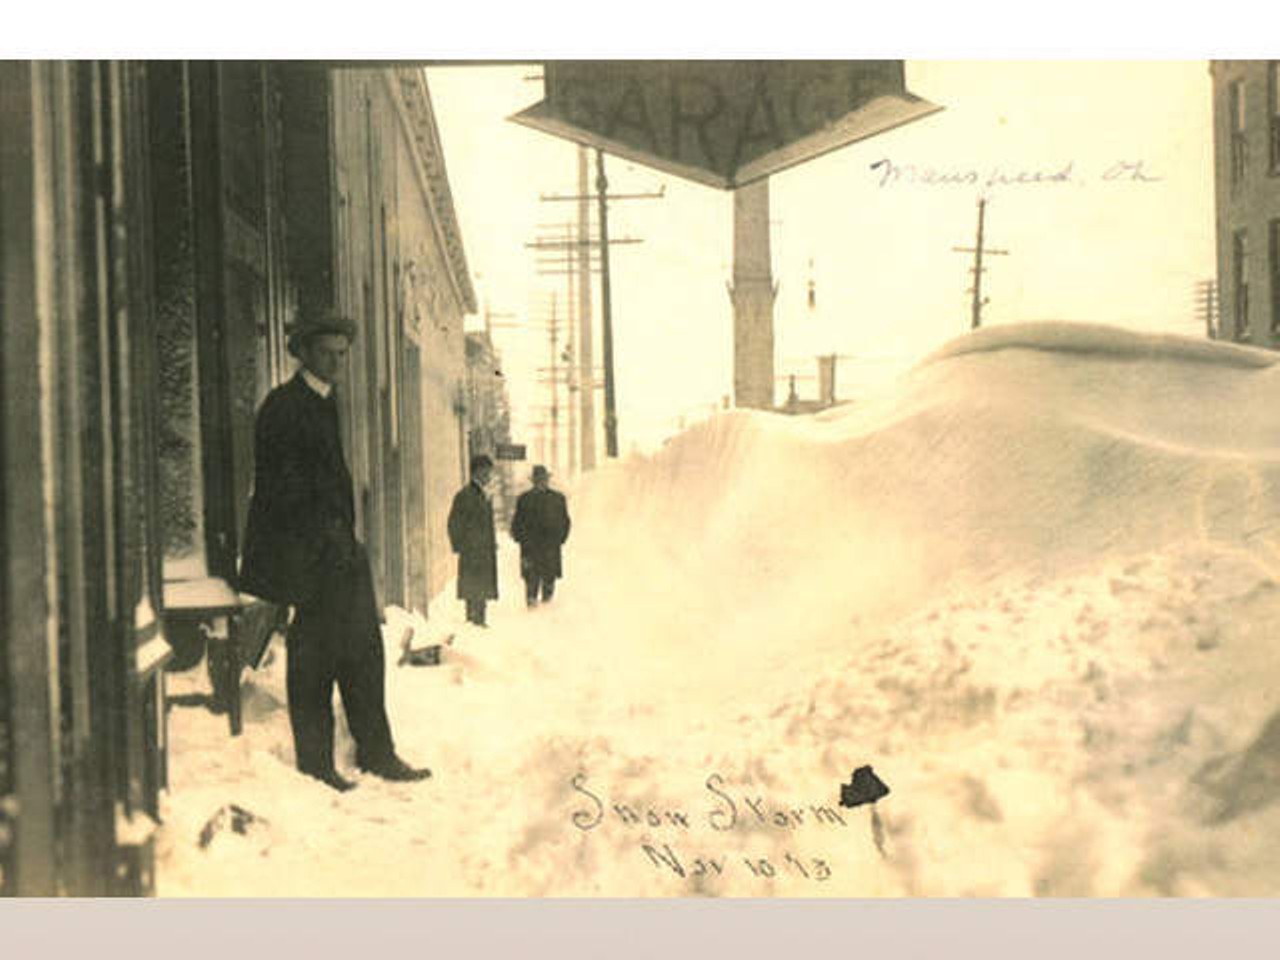 A man stands next to a large snowdrift, under a garage sign, after the Great Lakes Hurricane of 1913.